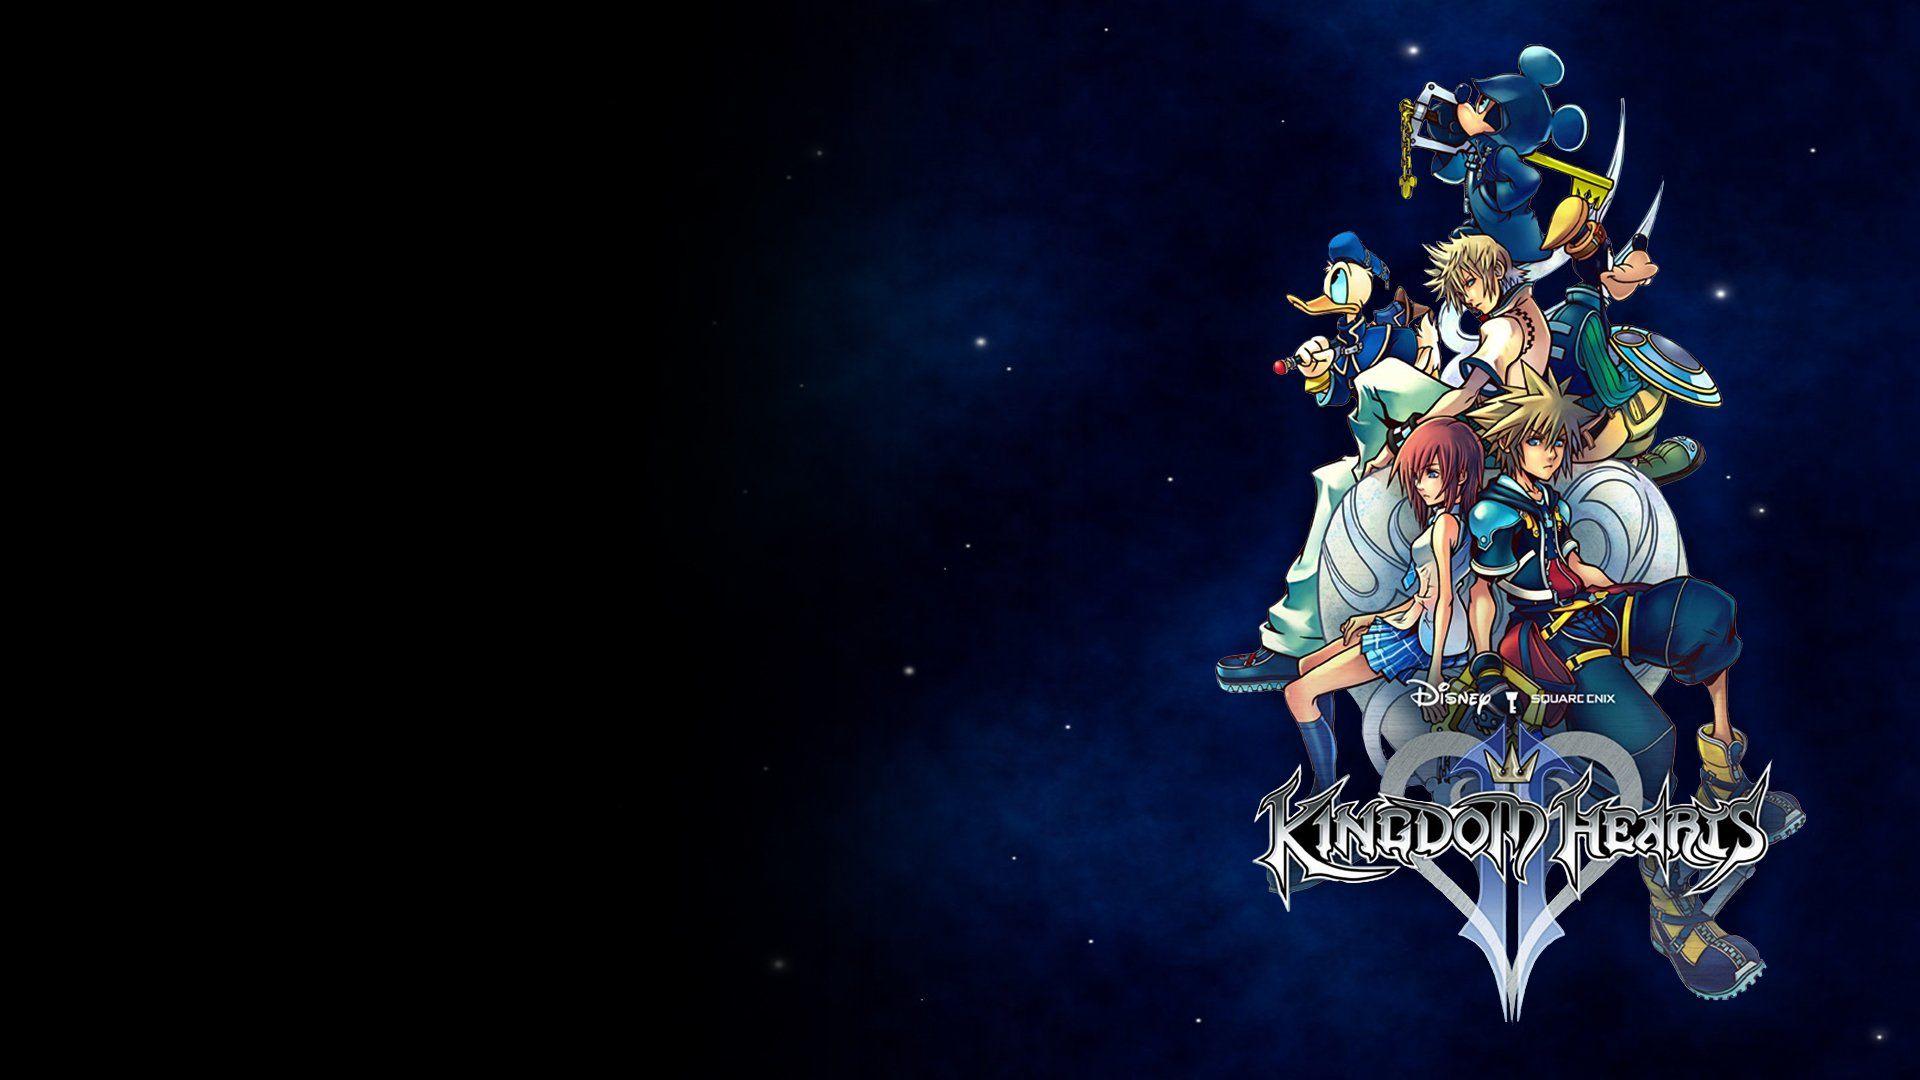 Kingdom Hearts 2 Wallpapers Top Free Kingdom Hearts 2 Backgrounds Wallpaperaccess